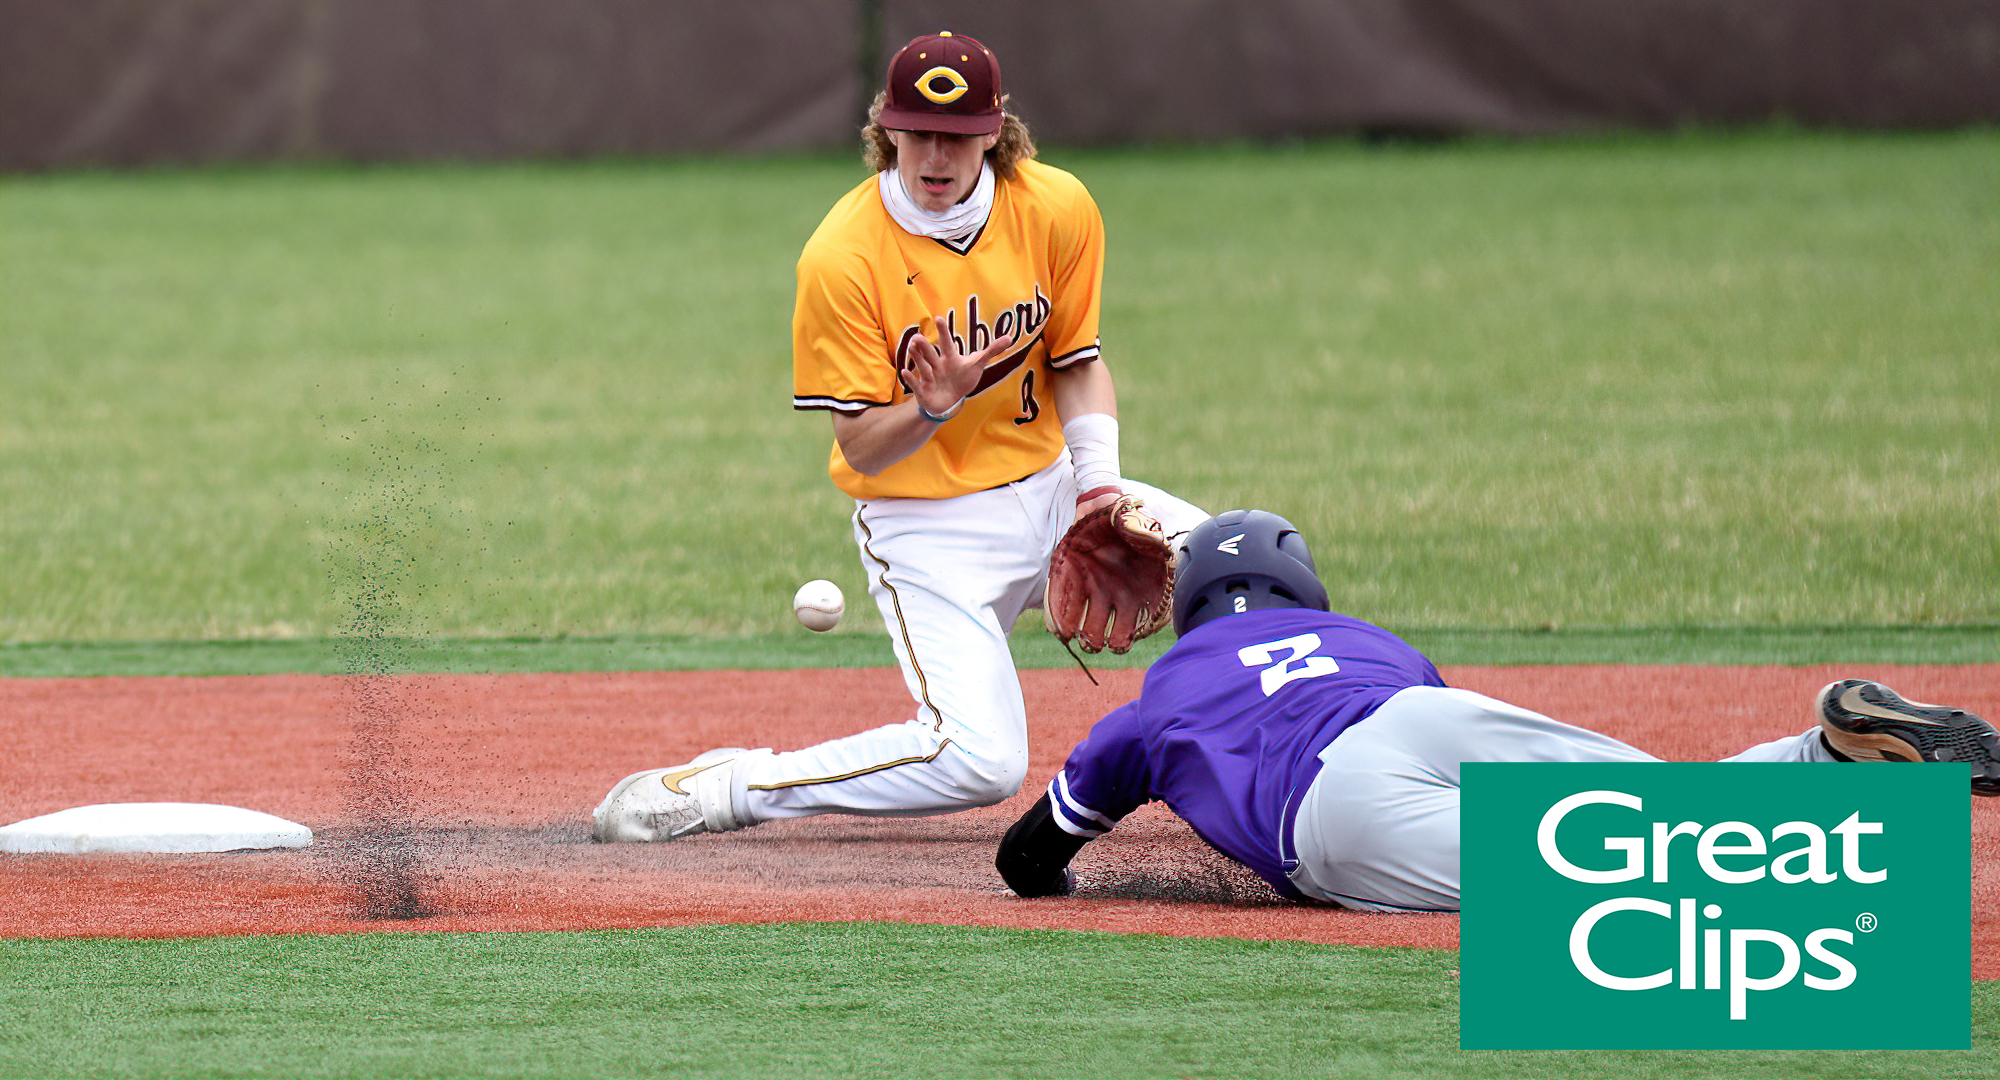 Shortstop Thomas Horan looks to corral a throw down from the catcher and put the tag on a would-be St. Thomas base stealer in Game 2 of the Cobbers' DH with UST.